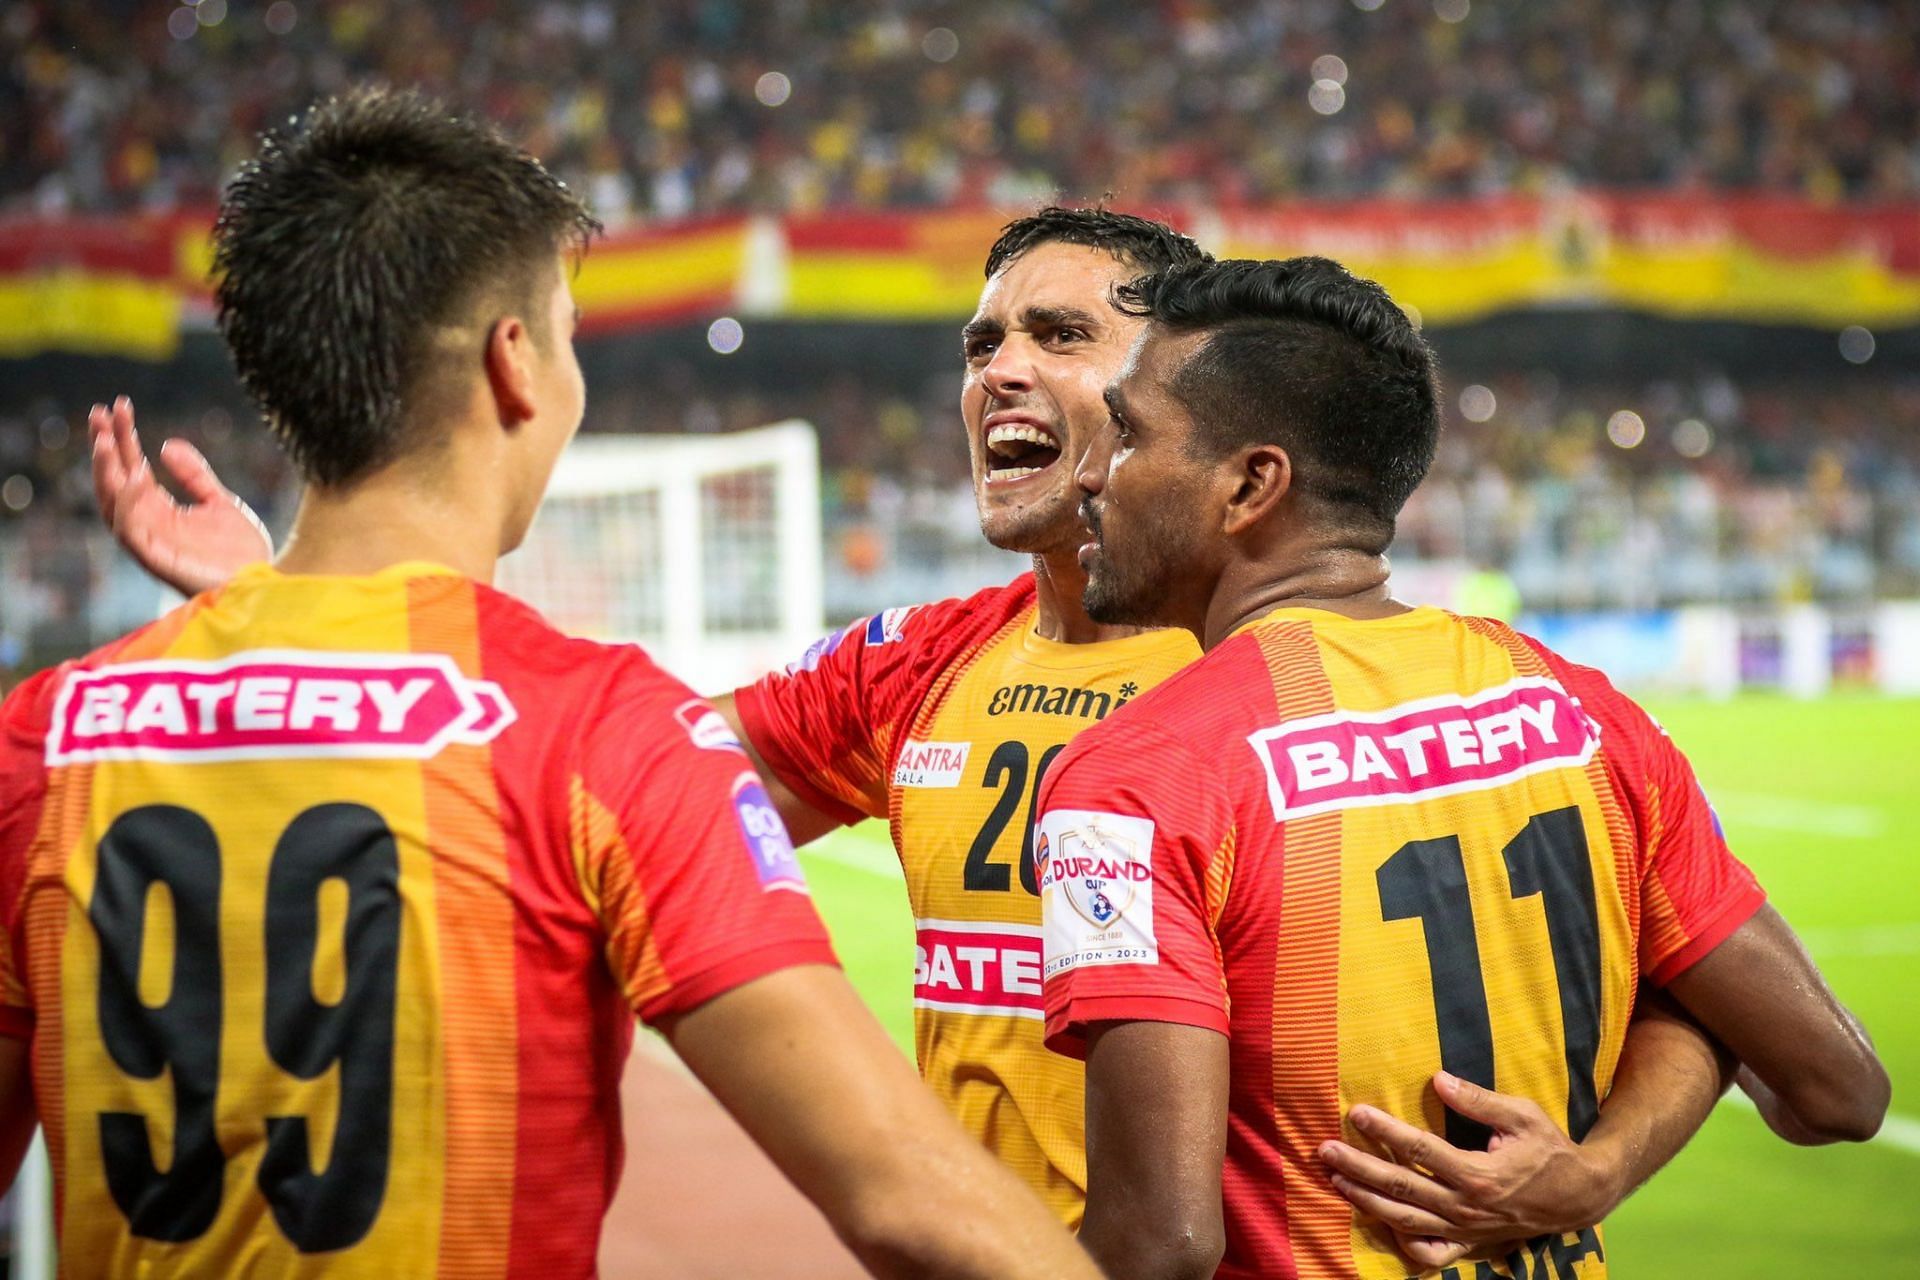 Nandhakumar Sekar scored the lone goal to win the Derby for East Bengal FC. (Image: East Bengal FC on Twitter)